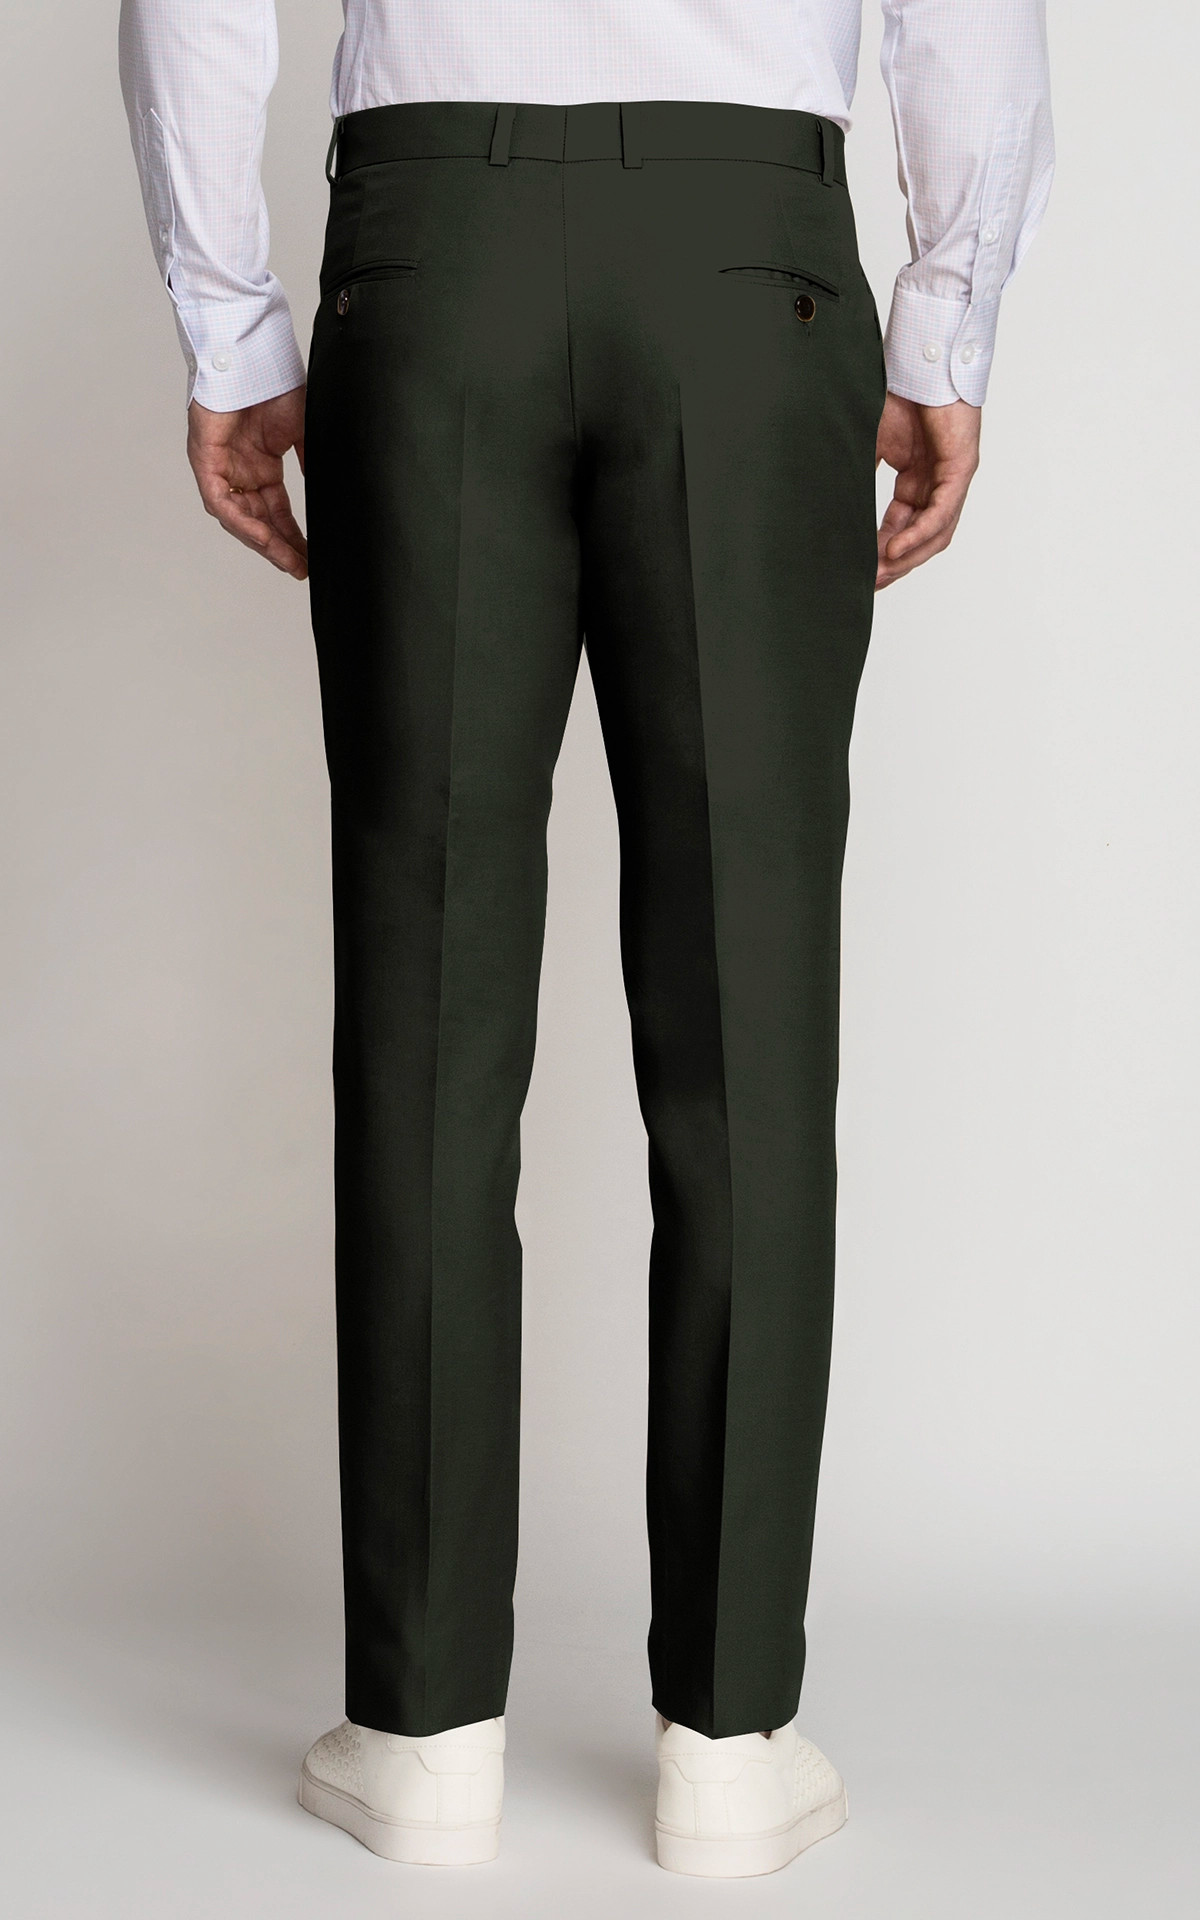 Casual Mens Olive Green Cotton Pant at Rs 260 in Ludhiana | ID: 24127865491